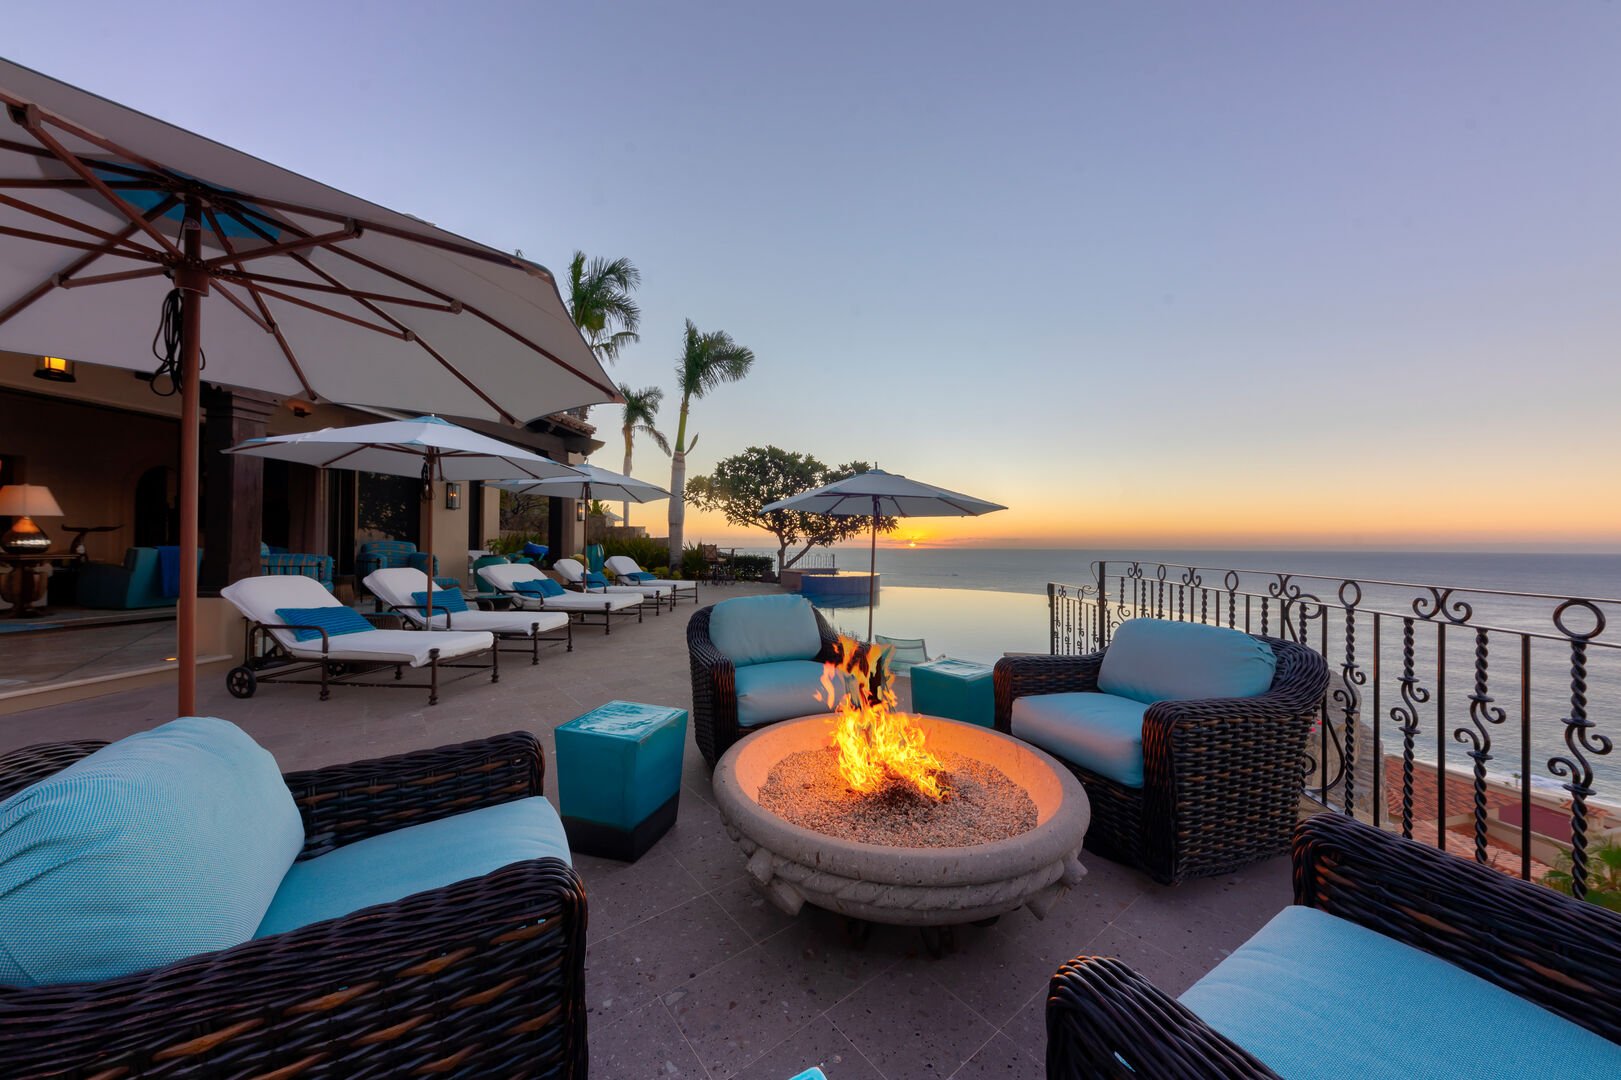 A lit fire pit surrounded by chairs at the Espiritu Casita 101